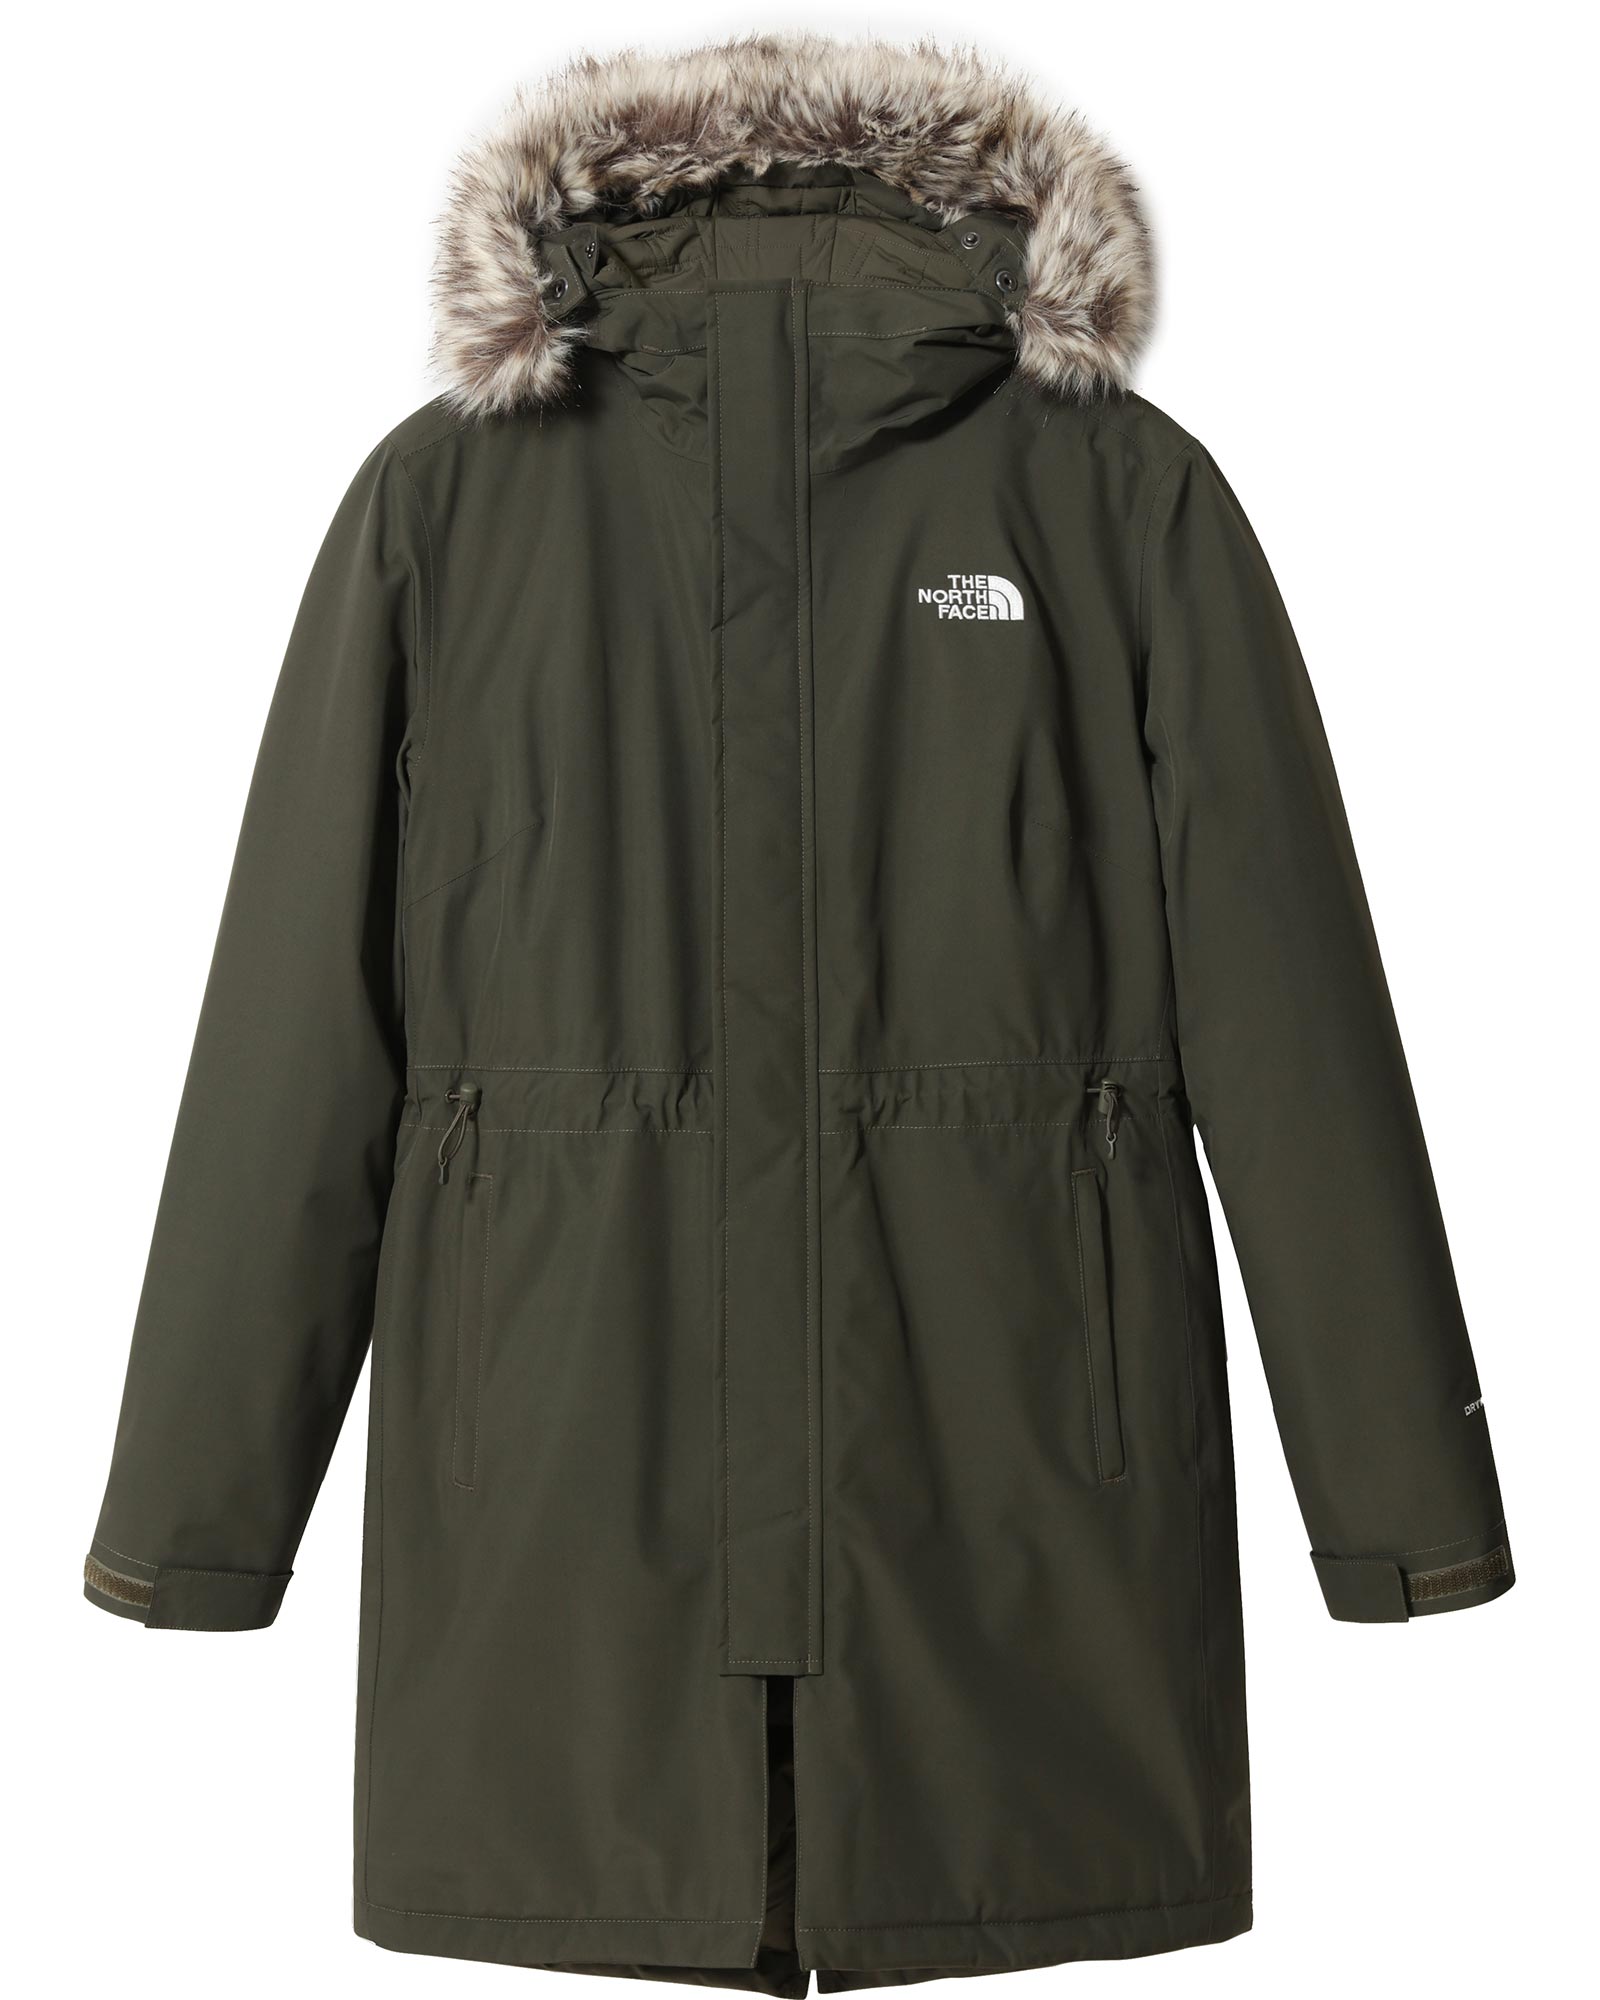 The North Face Zaneck Women’s Parka Jacket - New Taupe Green XS